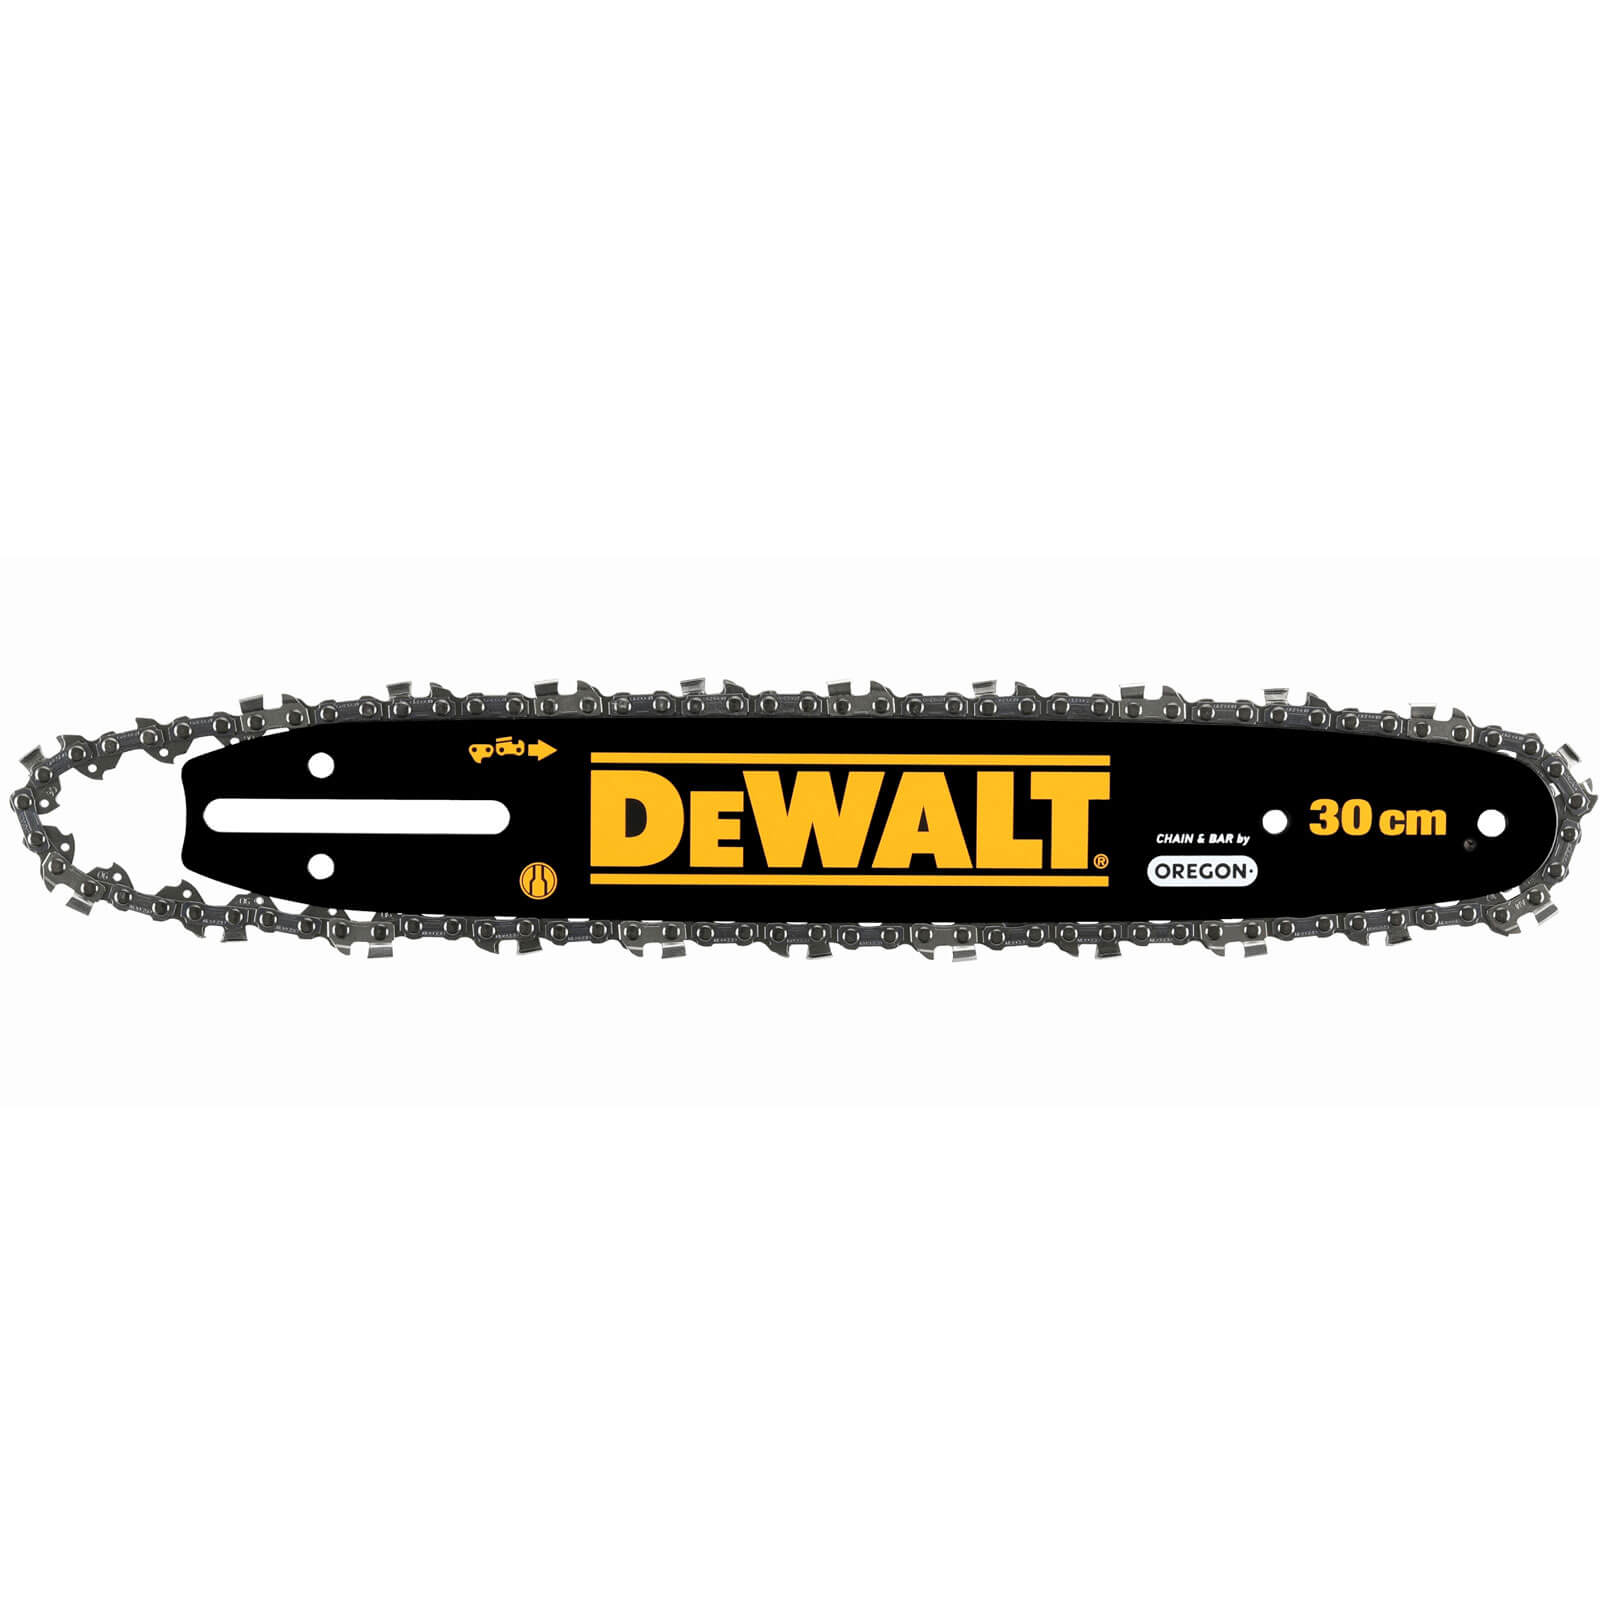 Photo of Dewalt Replacement Oregon Chainsaw Chain And Bar For Dcm565 300mm